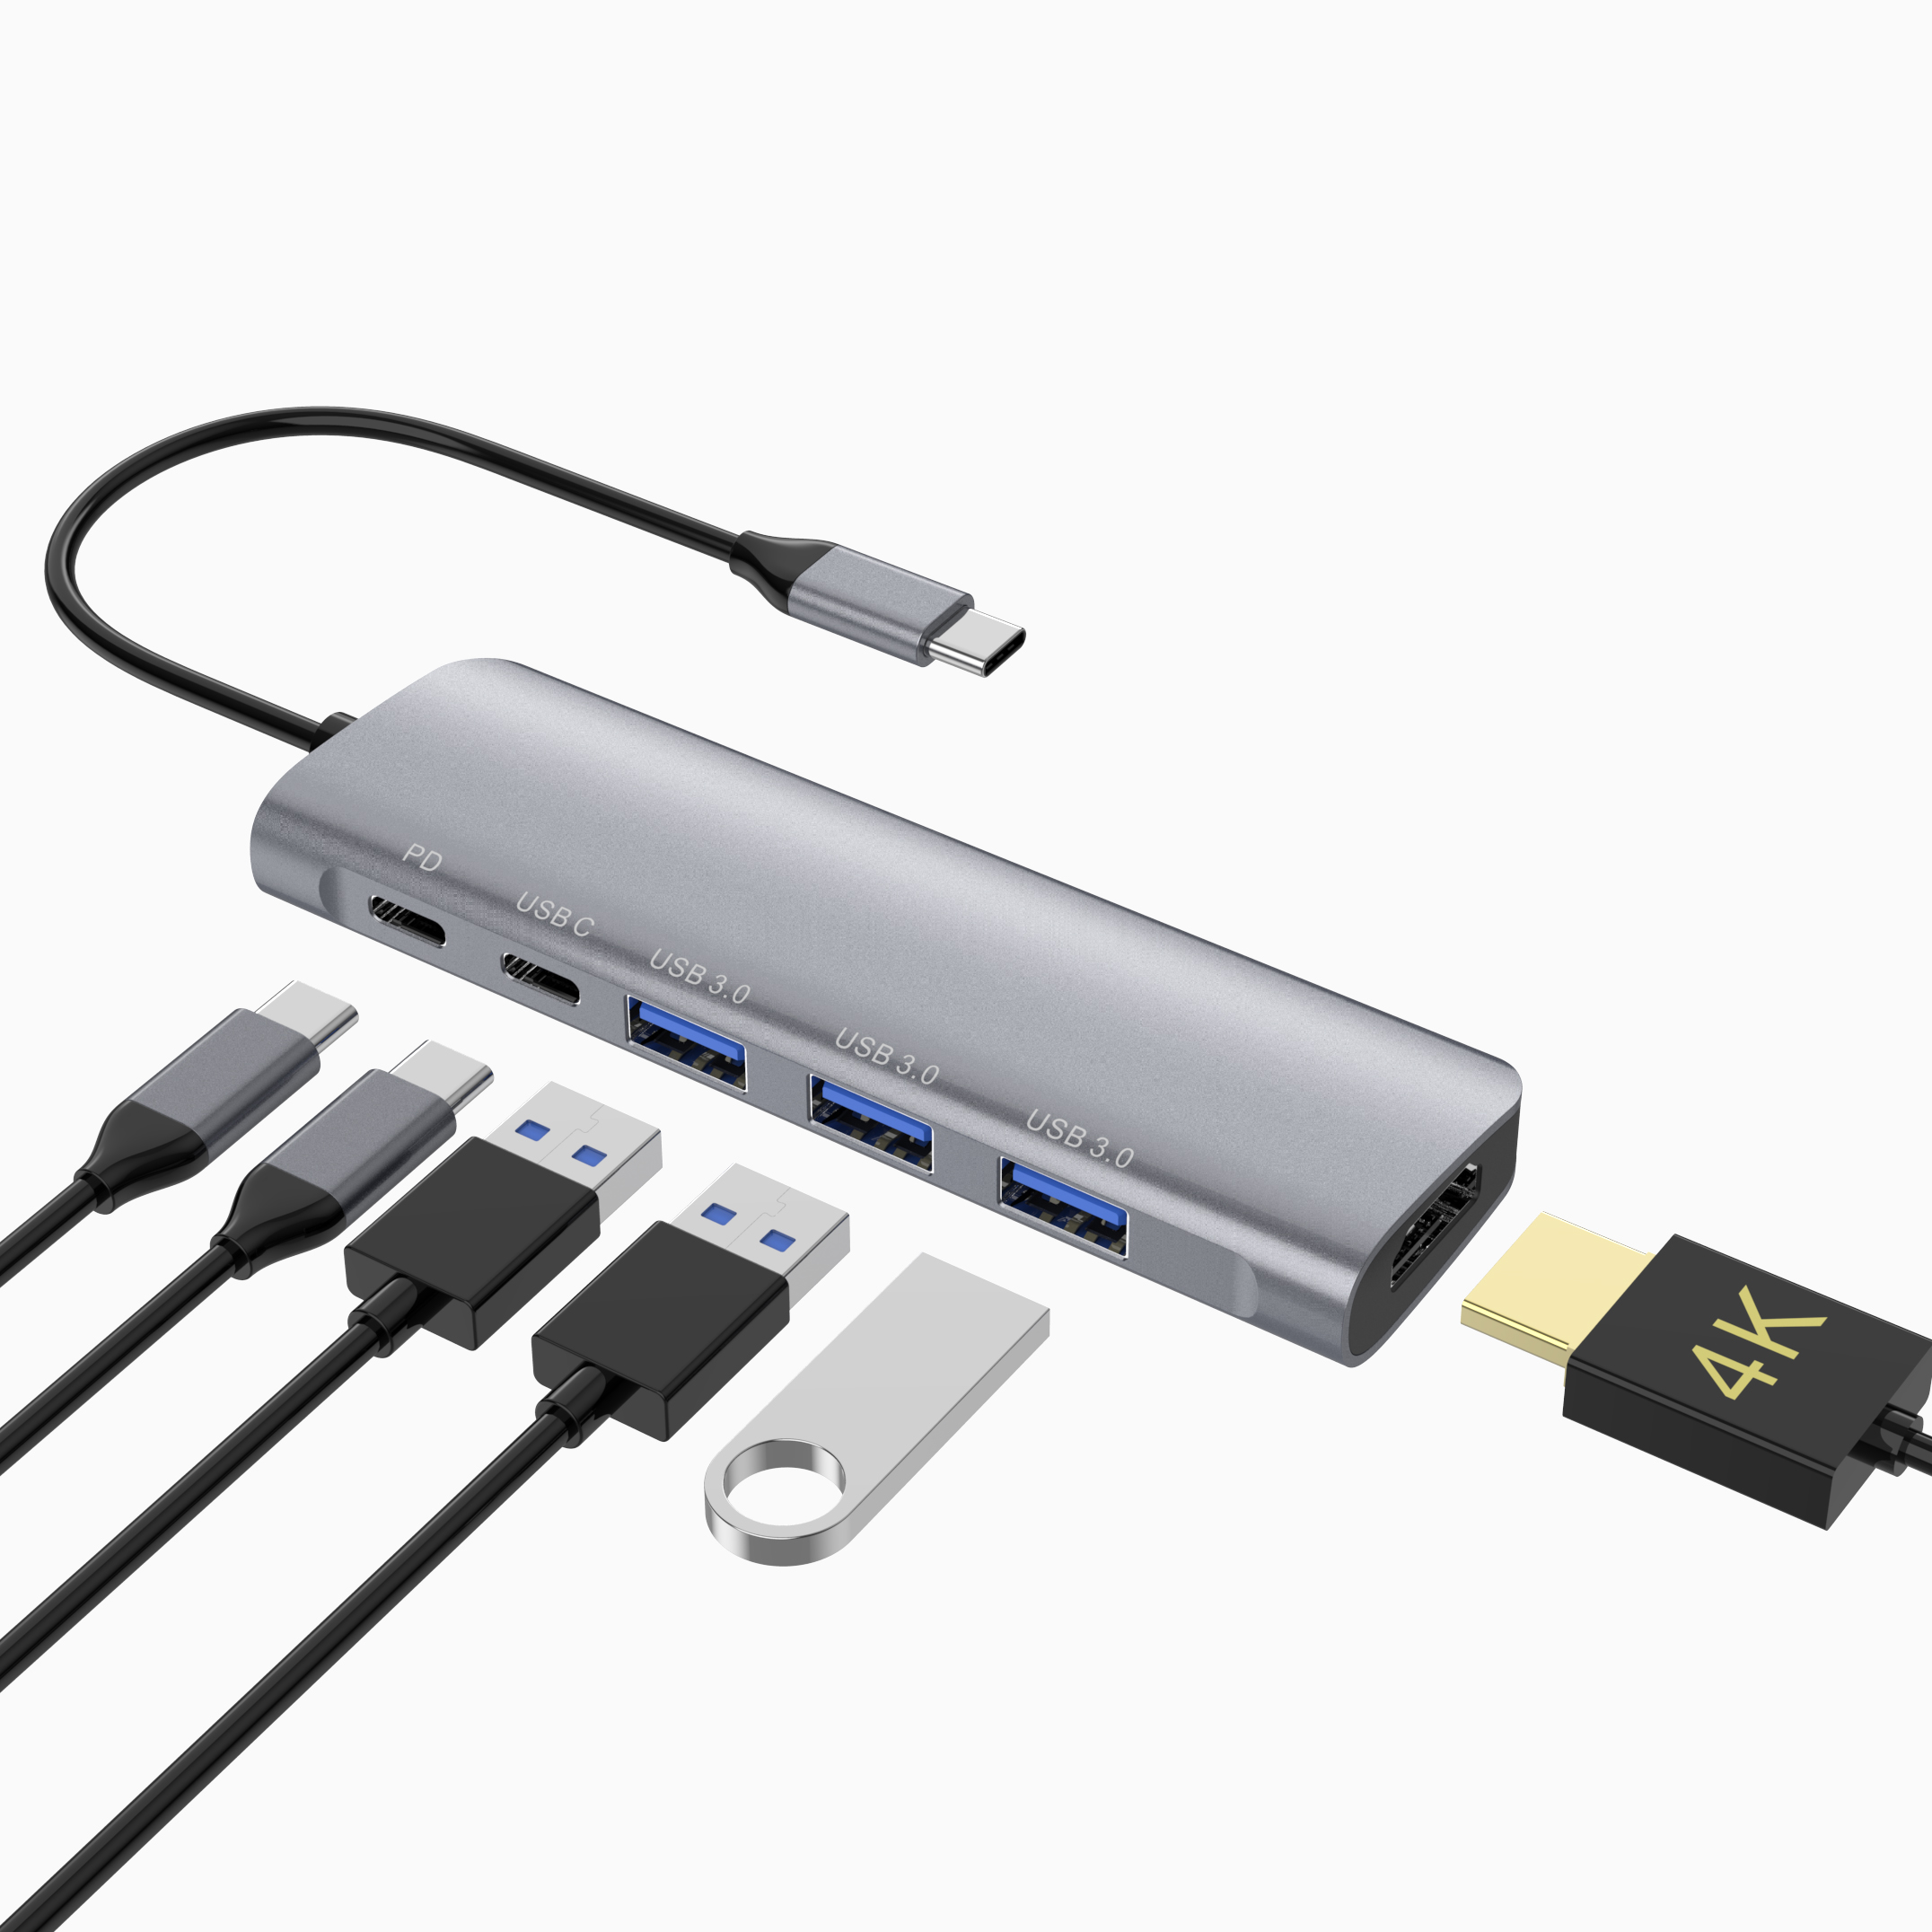 6 IN 1 USB C HUB with HDMI 4K30HZ + PD 100W + Type C Data + 3 x USB A 3.0 power delivery multiport adapter docking station for laptop macbook